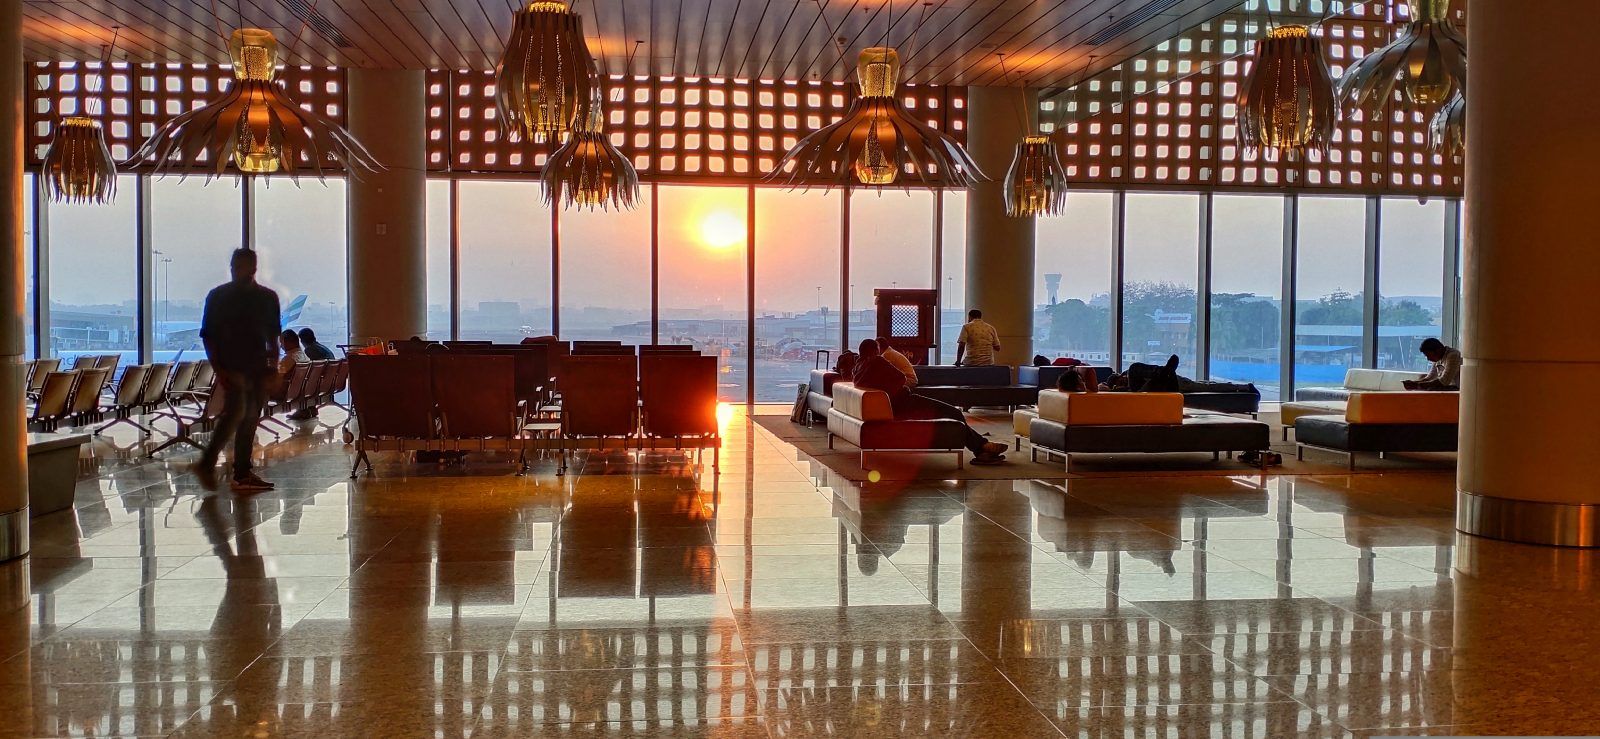 How long can you stay in airport lounge India?